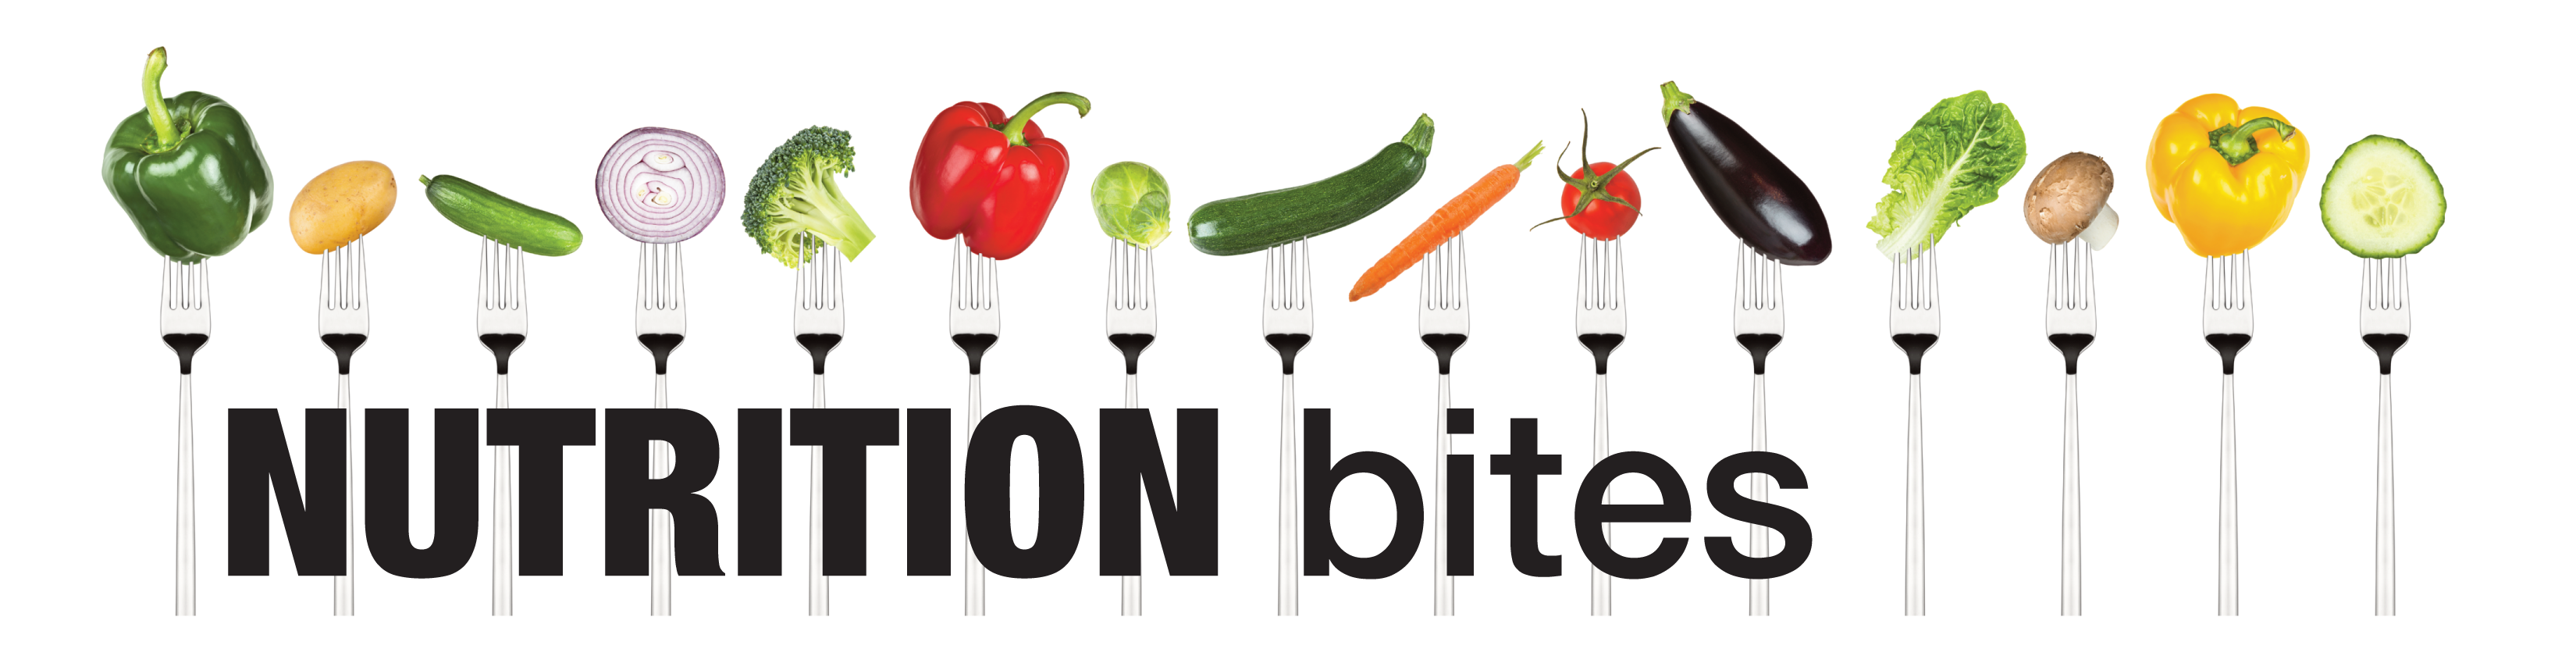 nutrition bites page banner